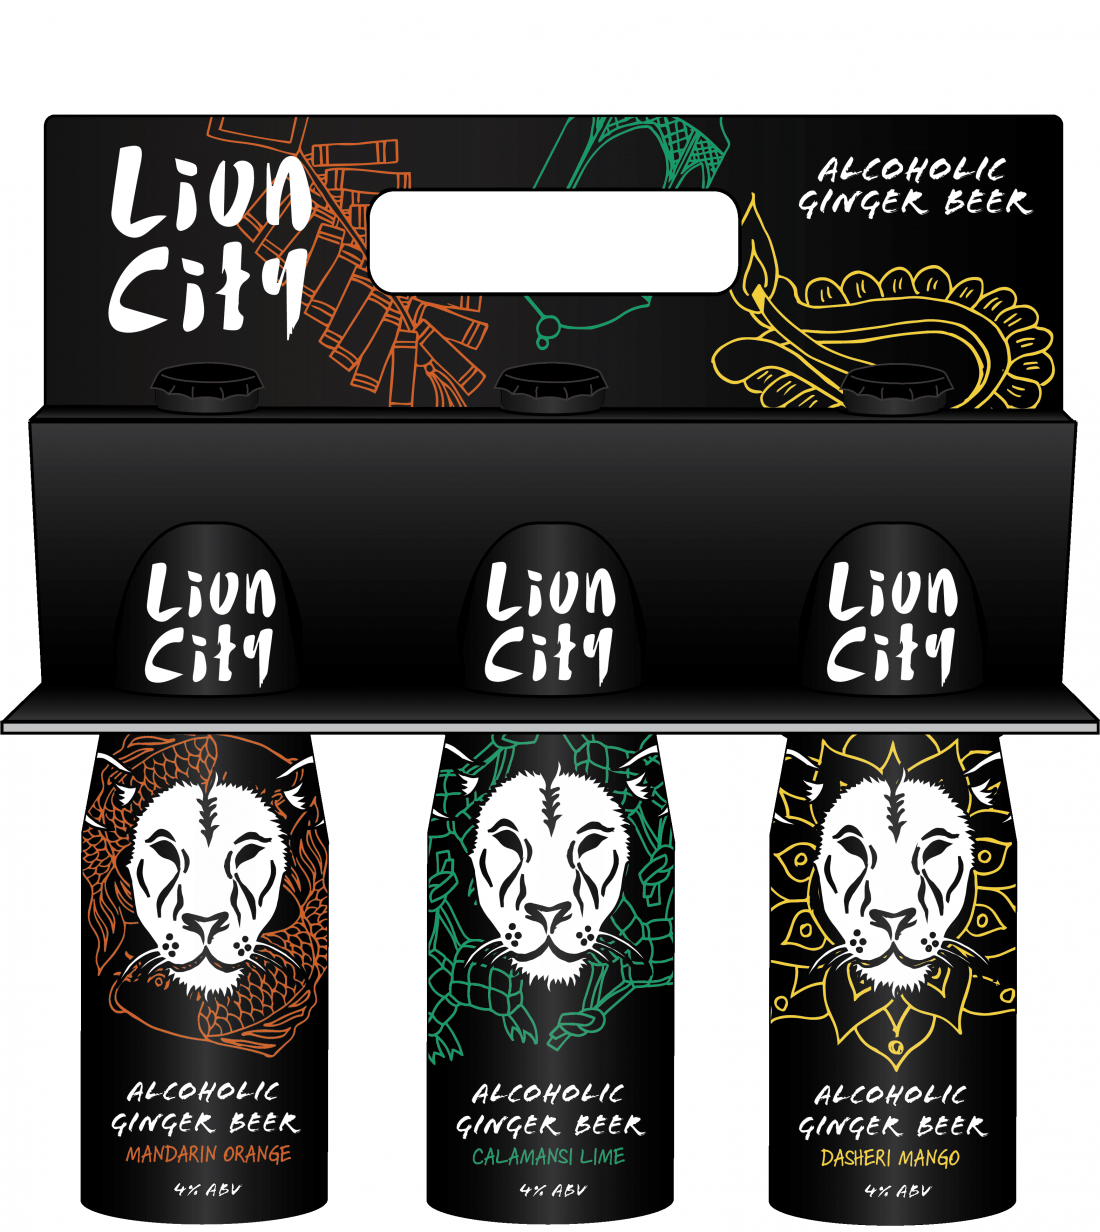 Lion City Alcoholic Ginger Beer Pack